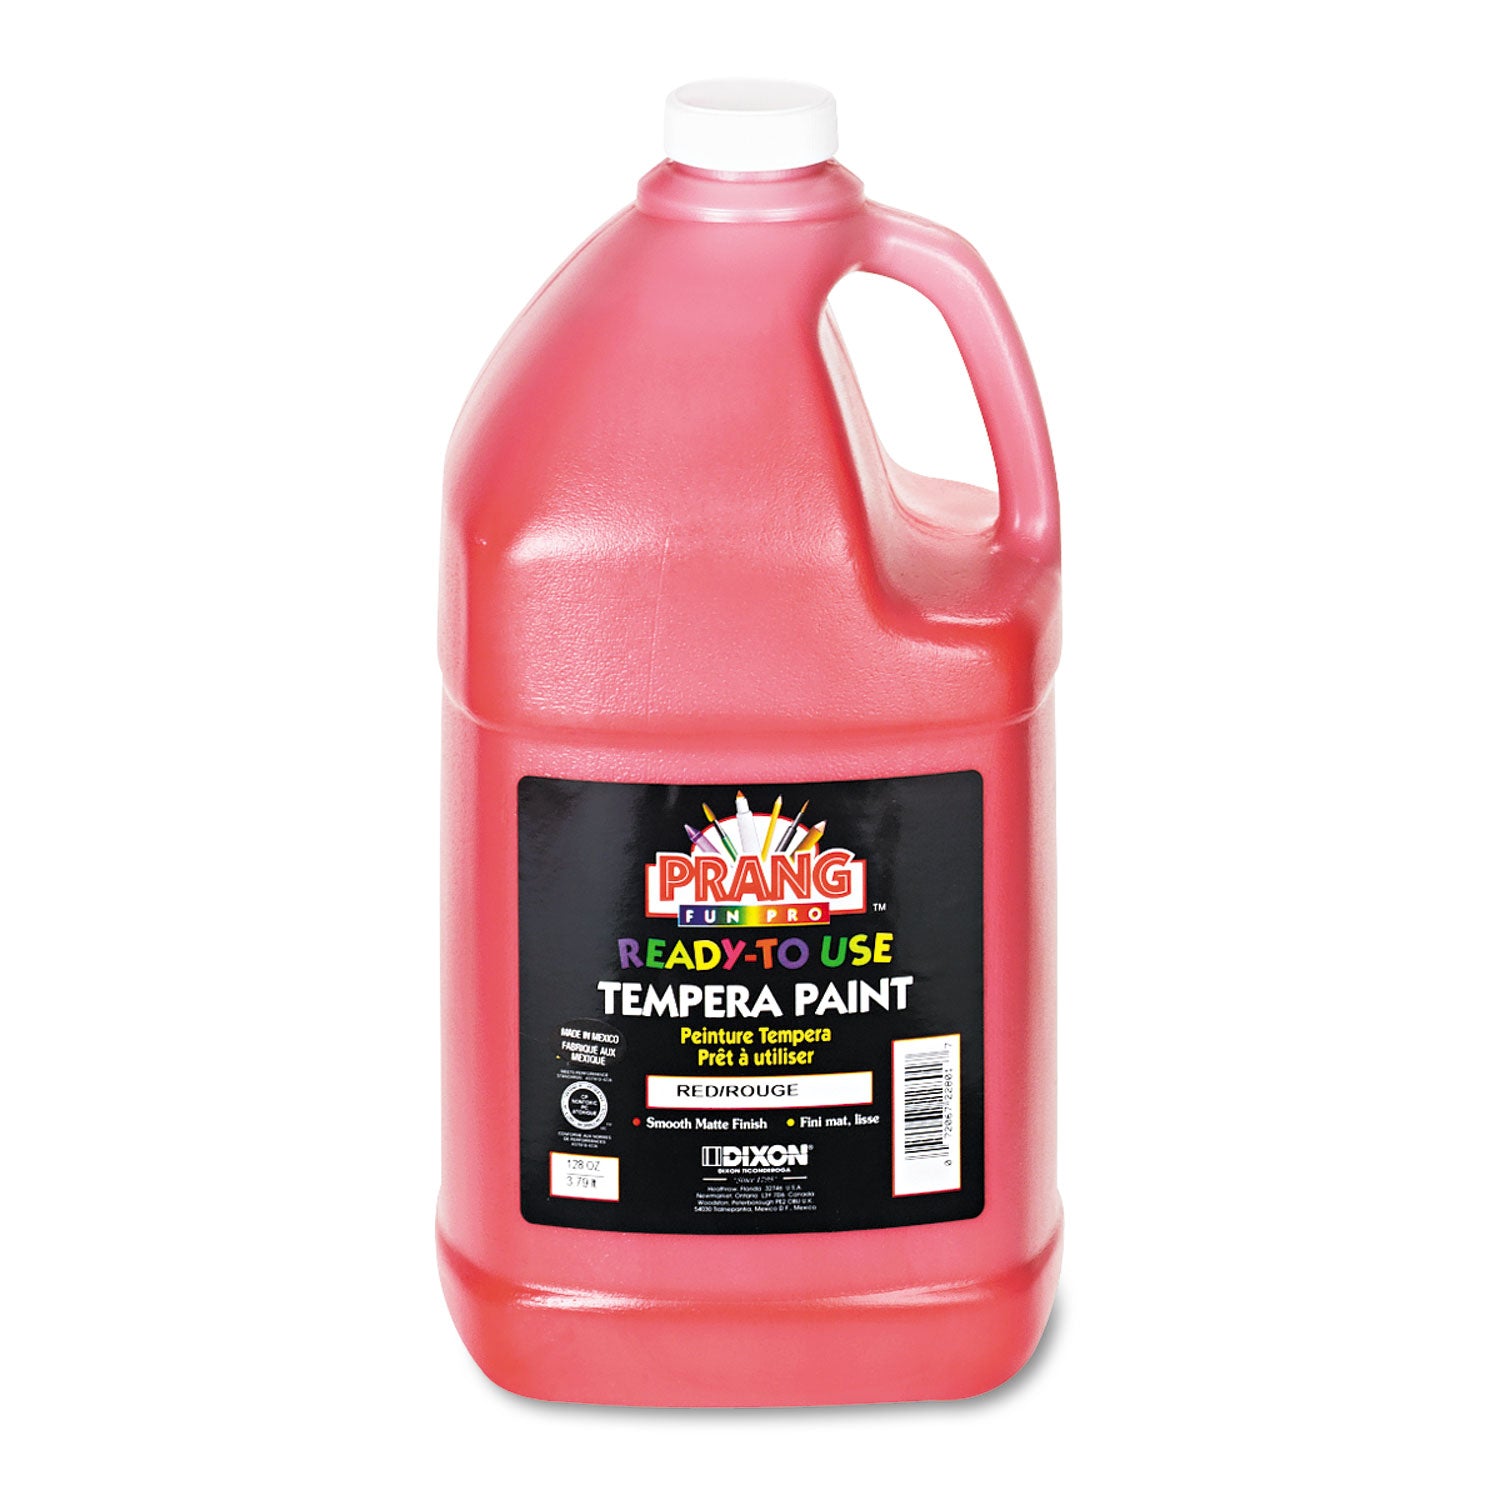 Ready-to-Use Tempera Paint, Red, 1 gal Bottle - 